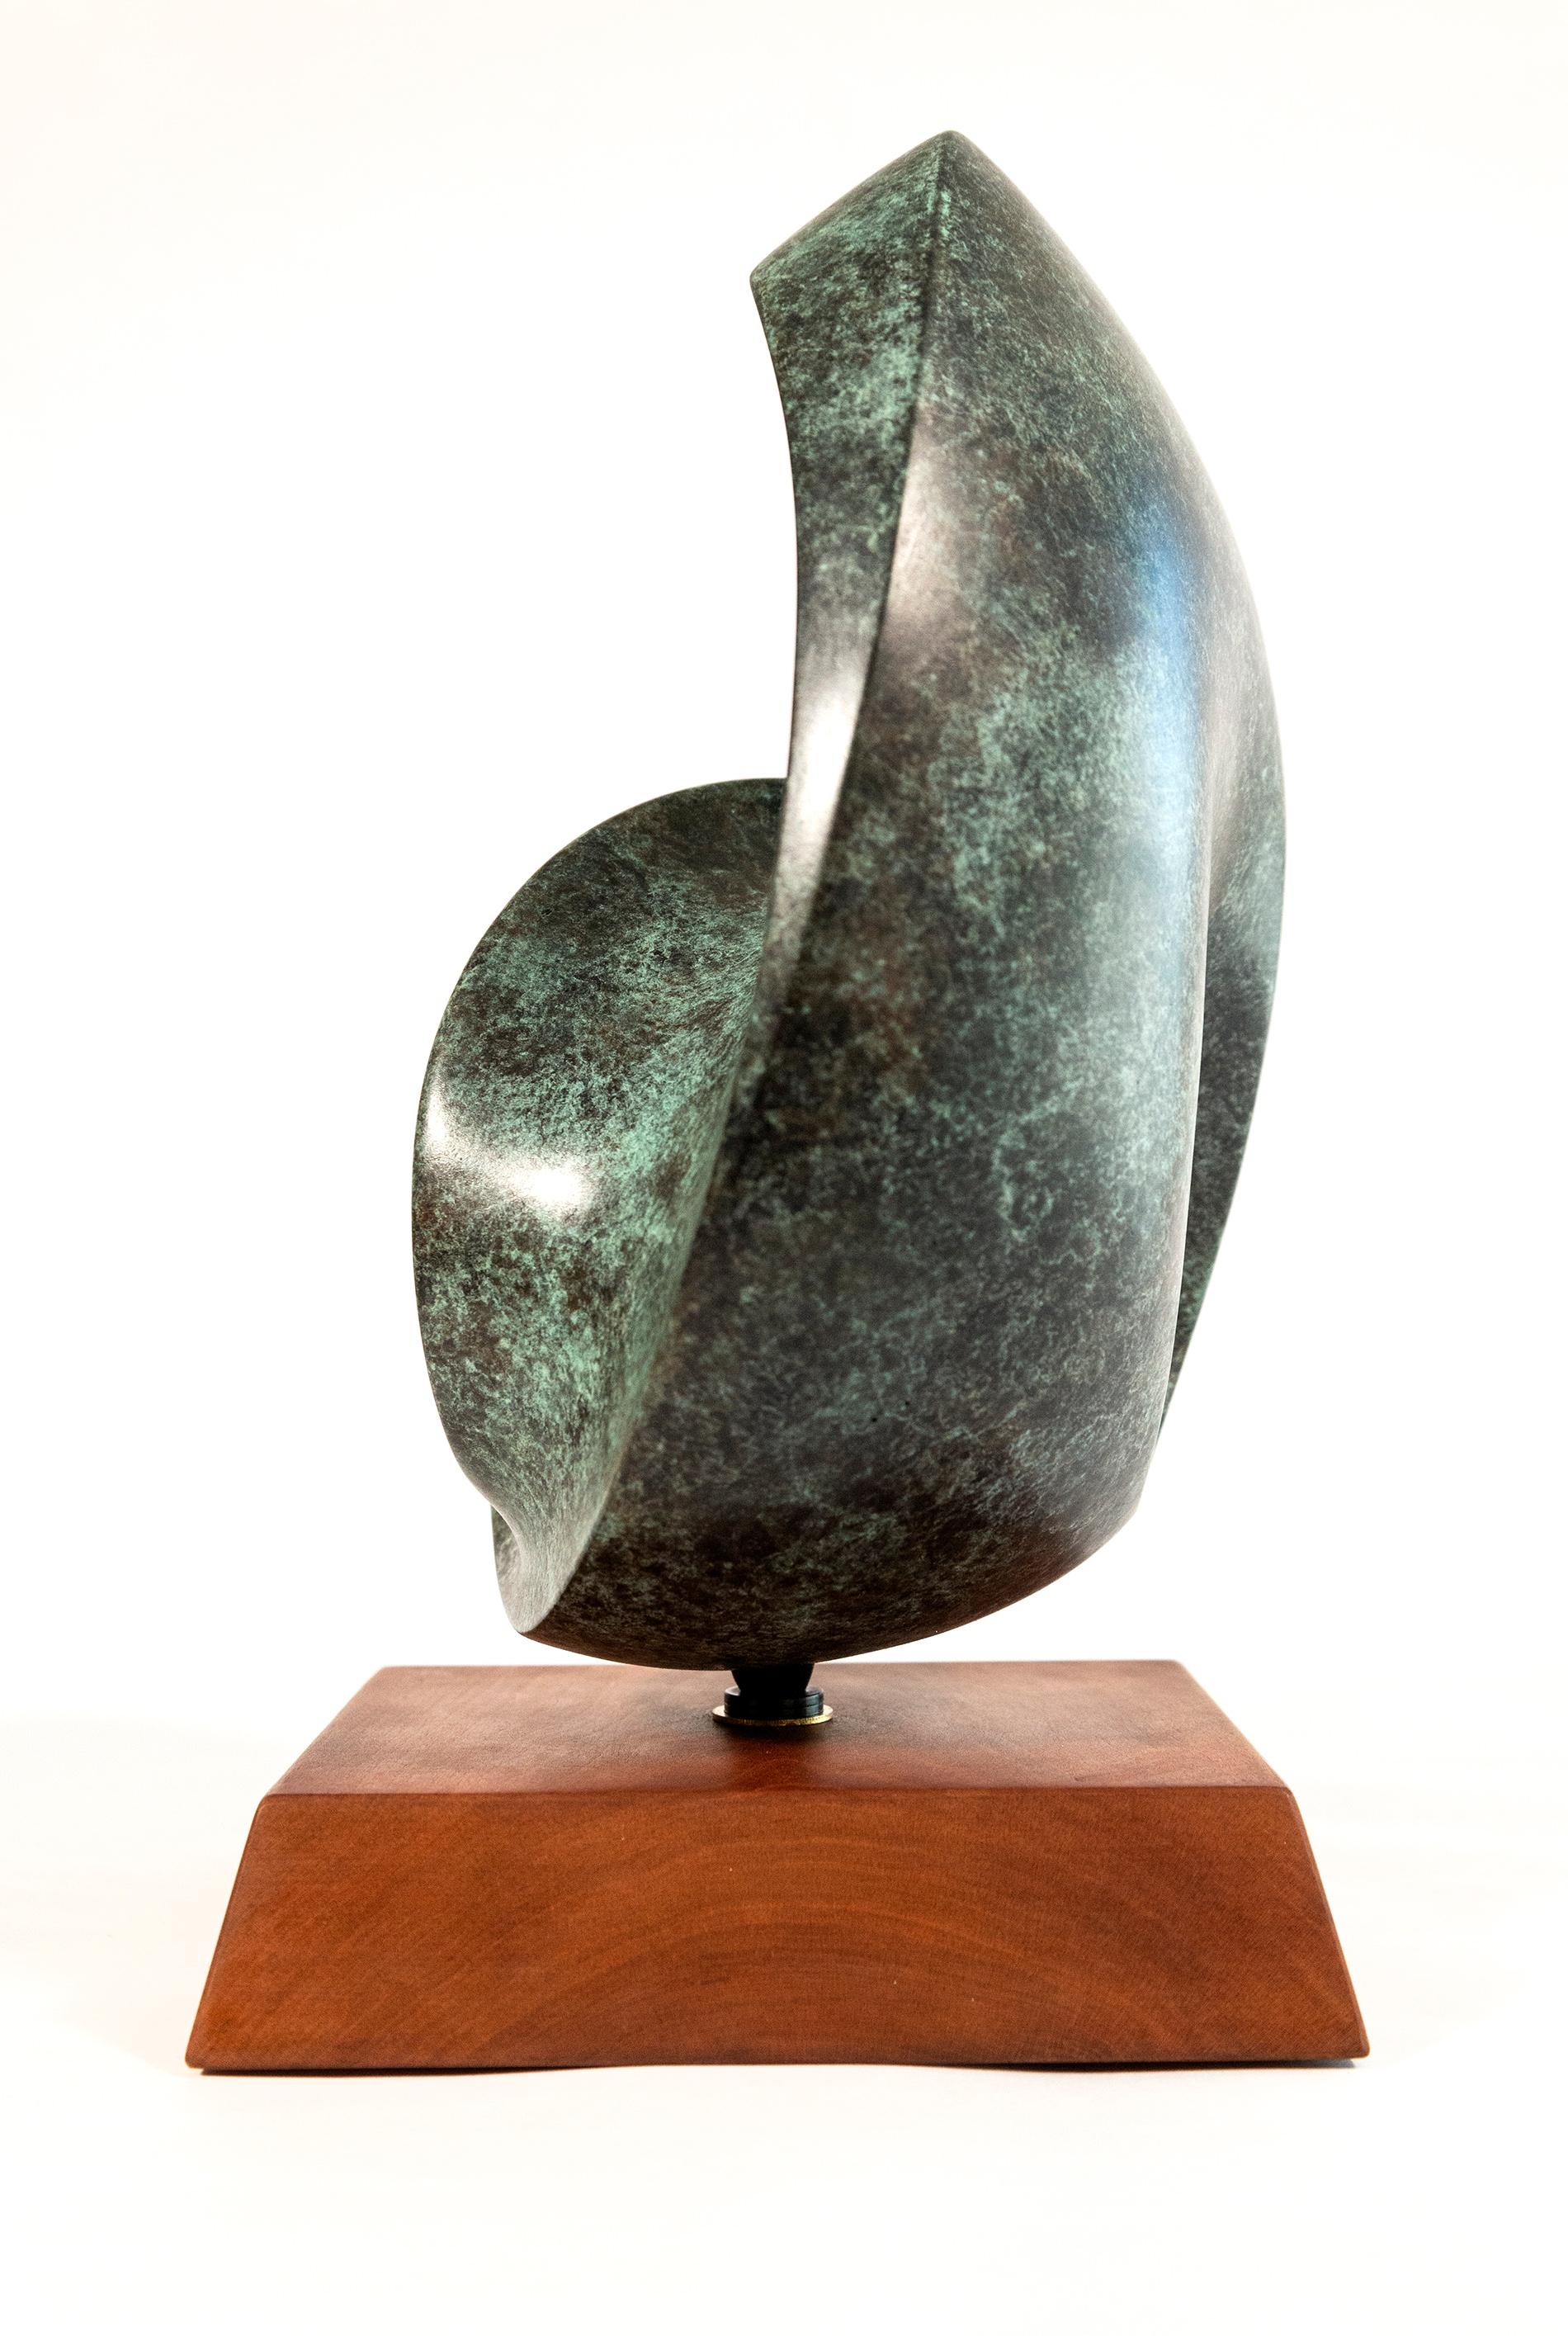 At once expressive and elegant, this abstract bronze sculpture is by David Chamberlain. The contemporary form is reminiscent of a half-moon shape and appears to be one continuous surface. Chamberlain’s sculptures are distinguished by this continuity